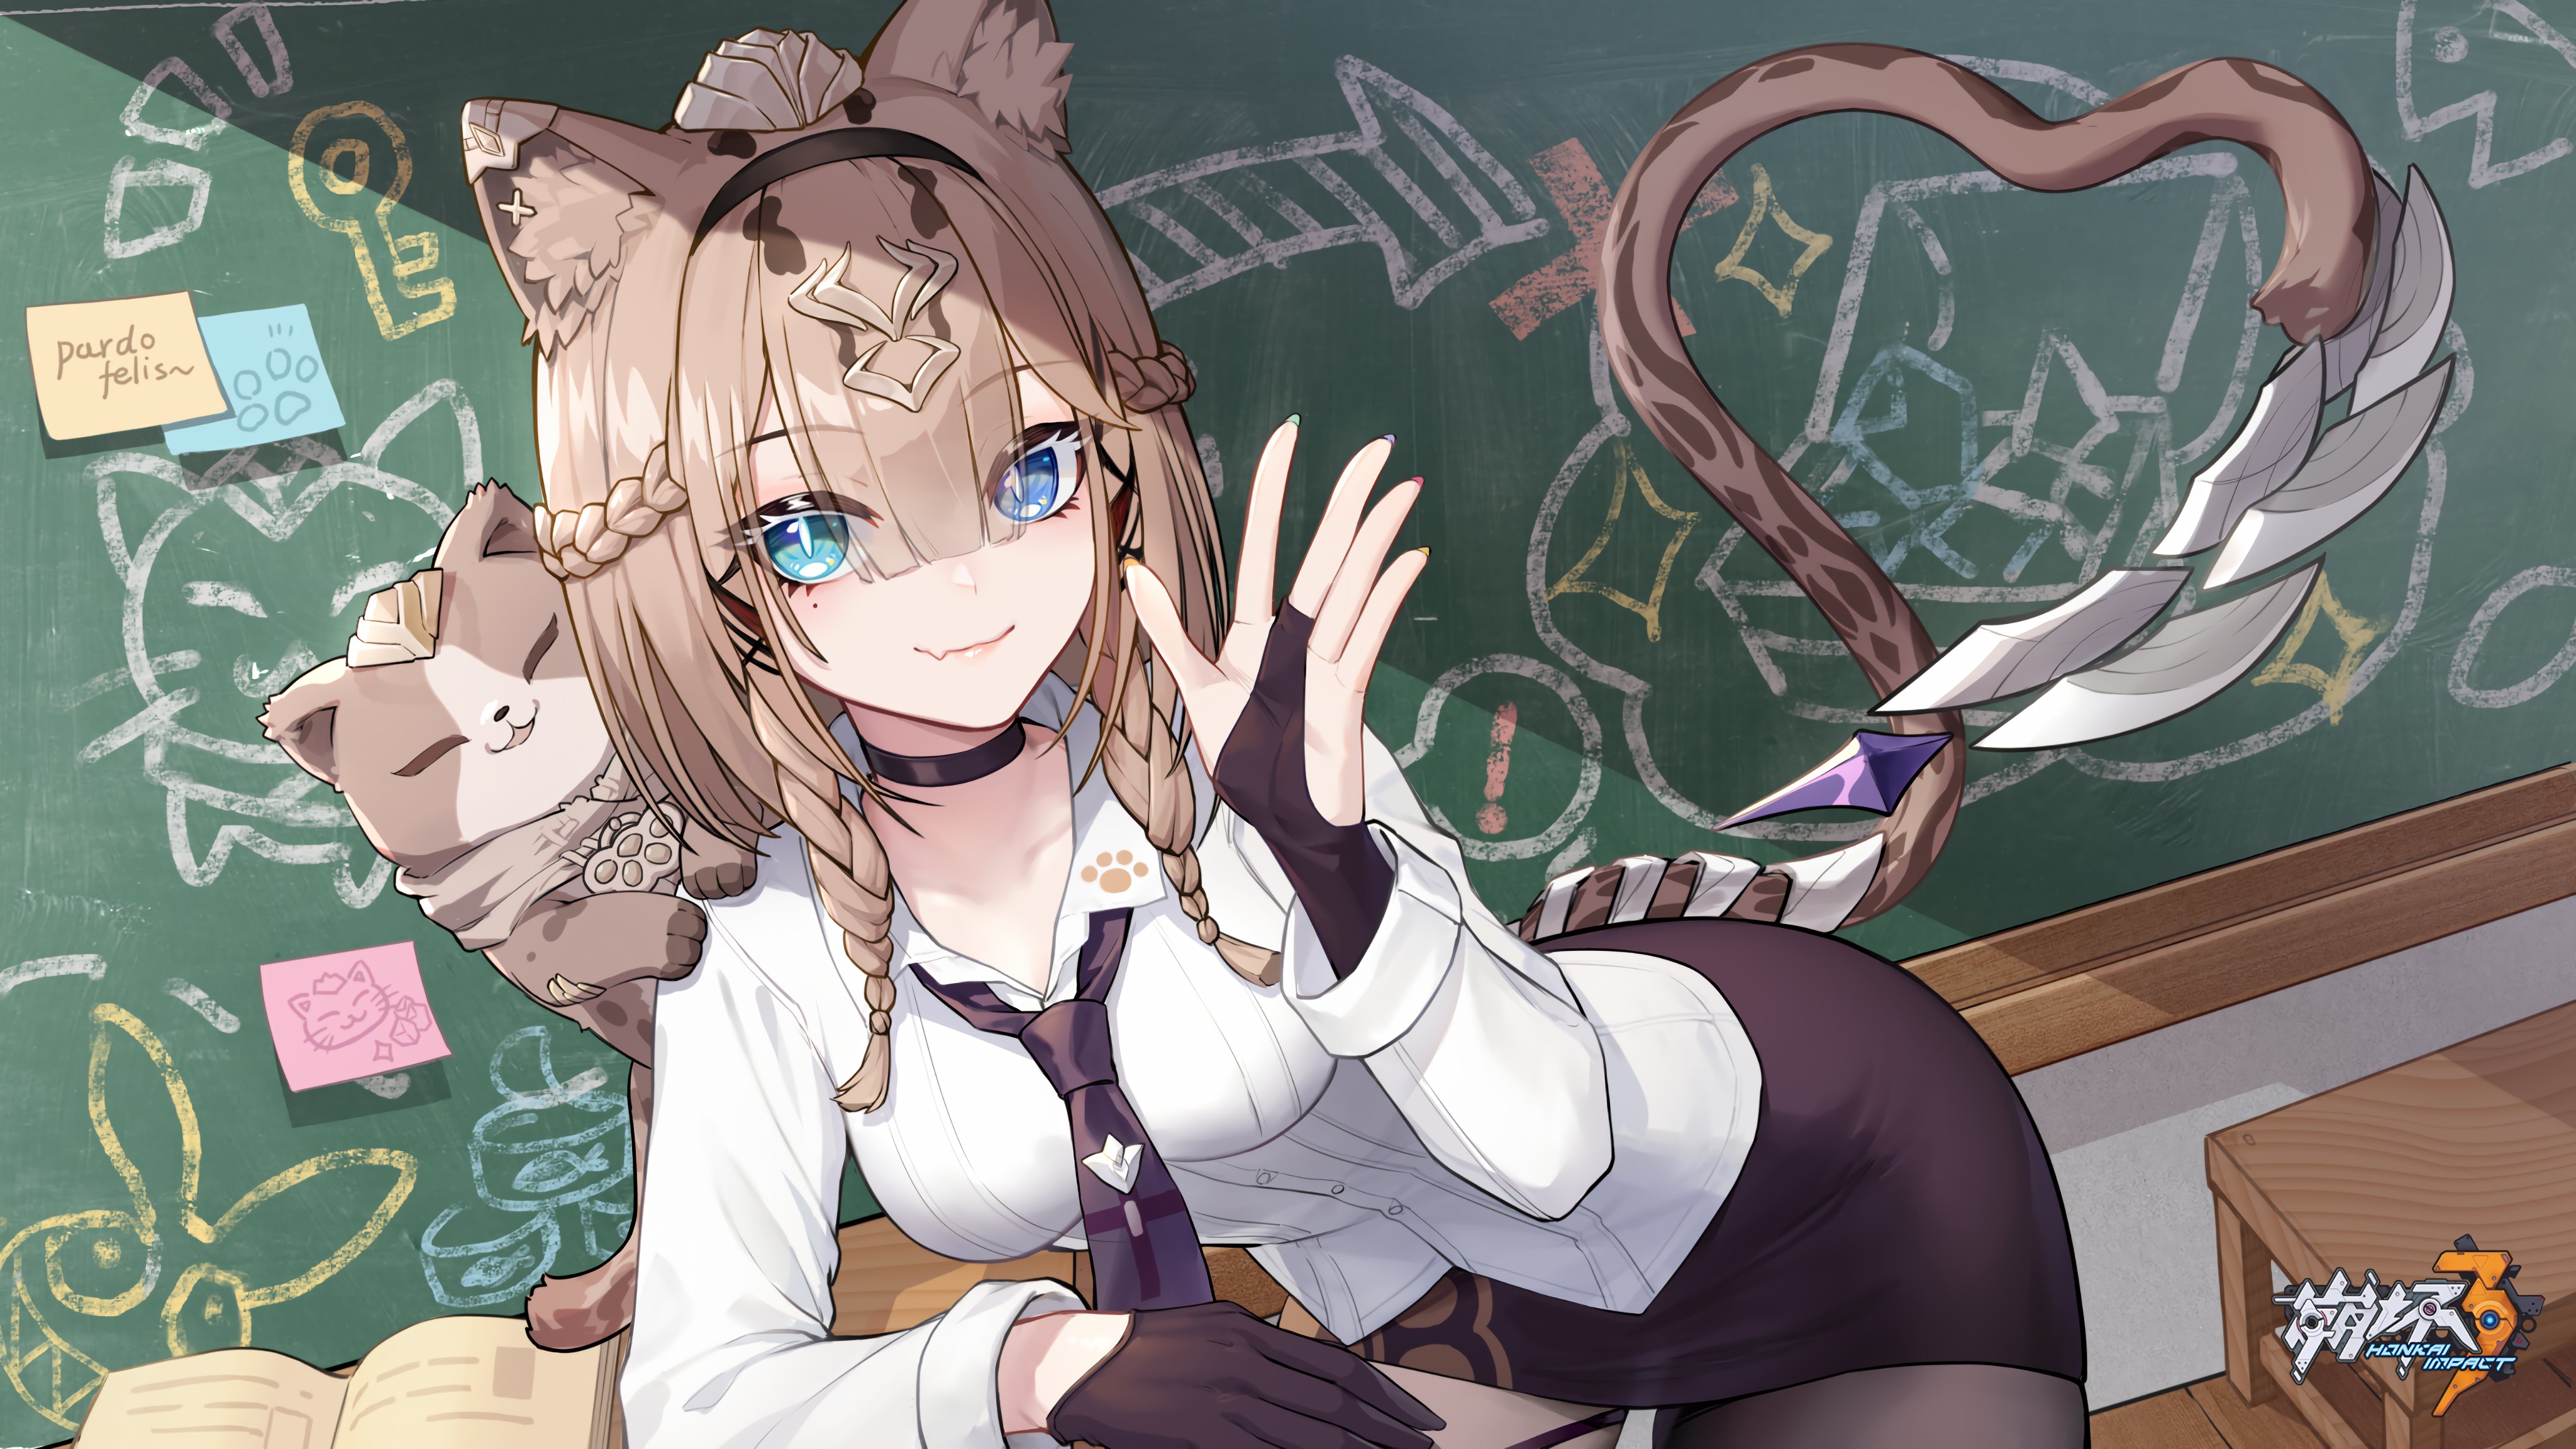 Wyverein' Classroom Official Wallpaper Upscaled